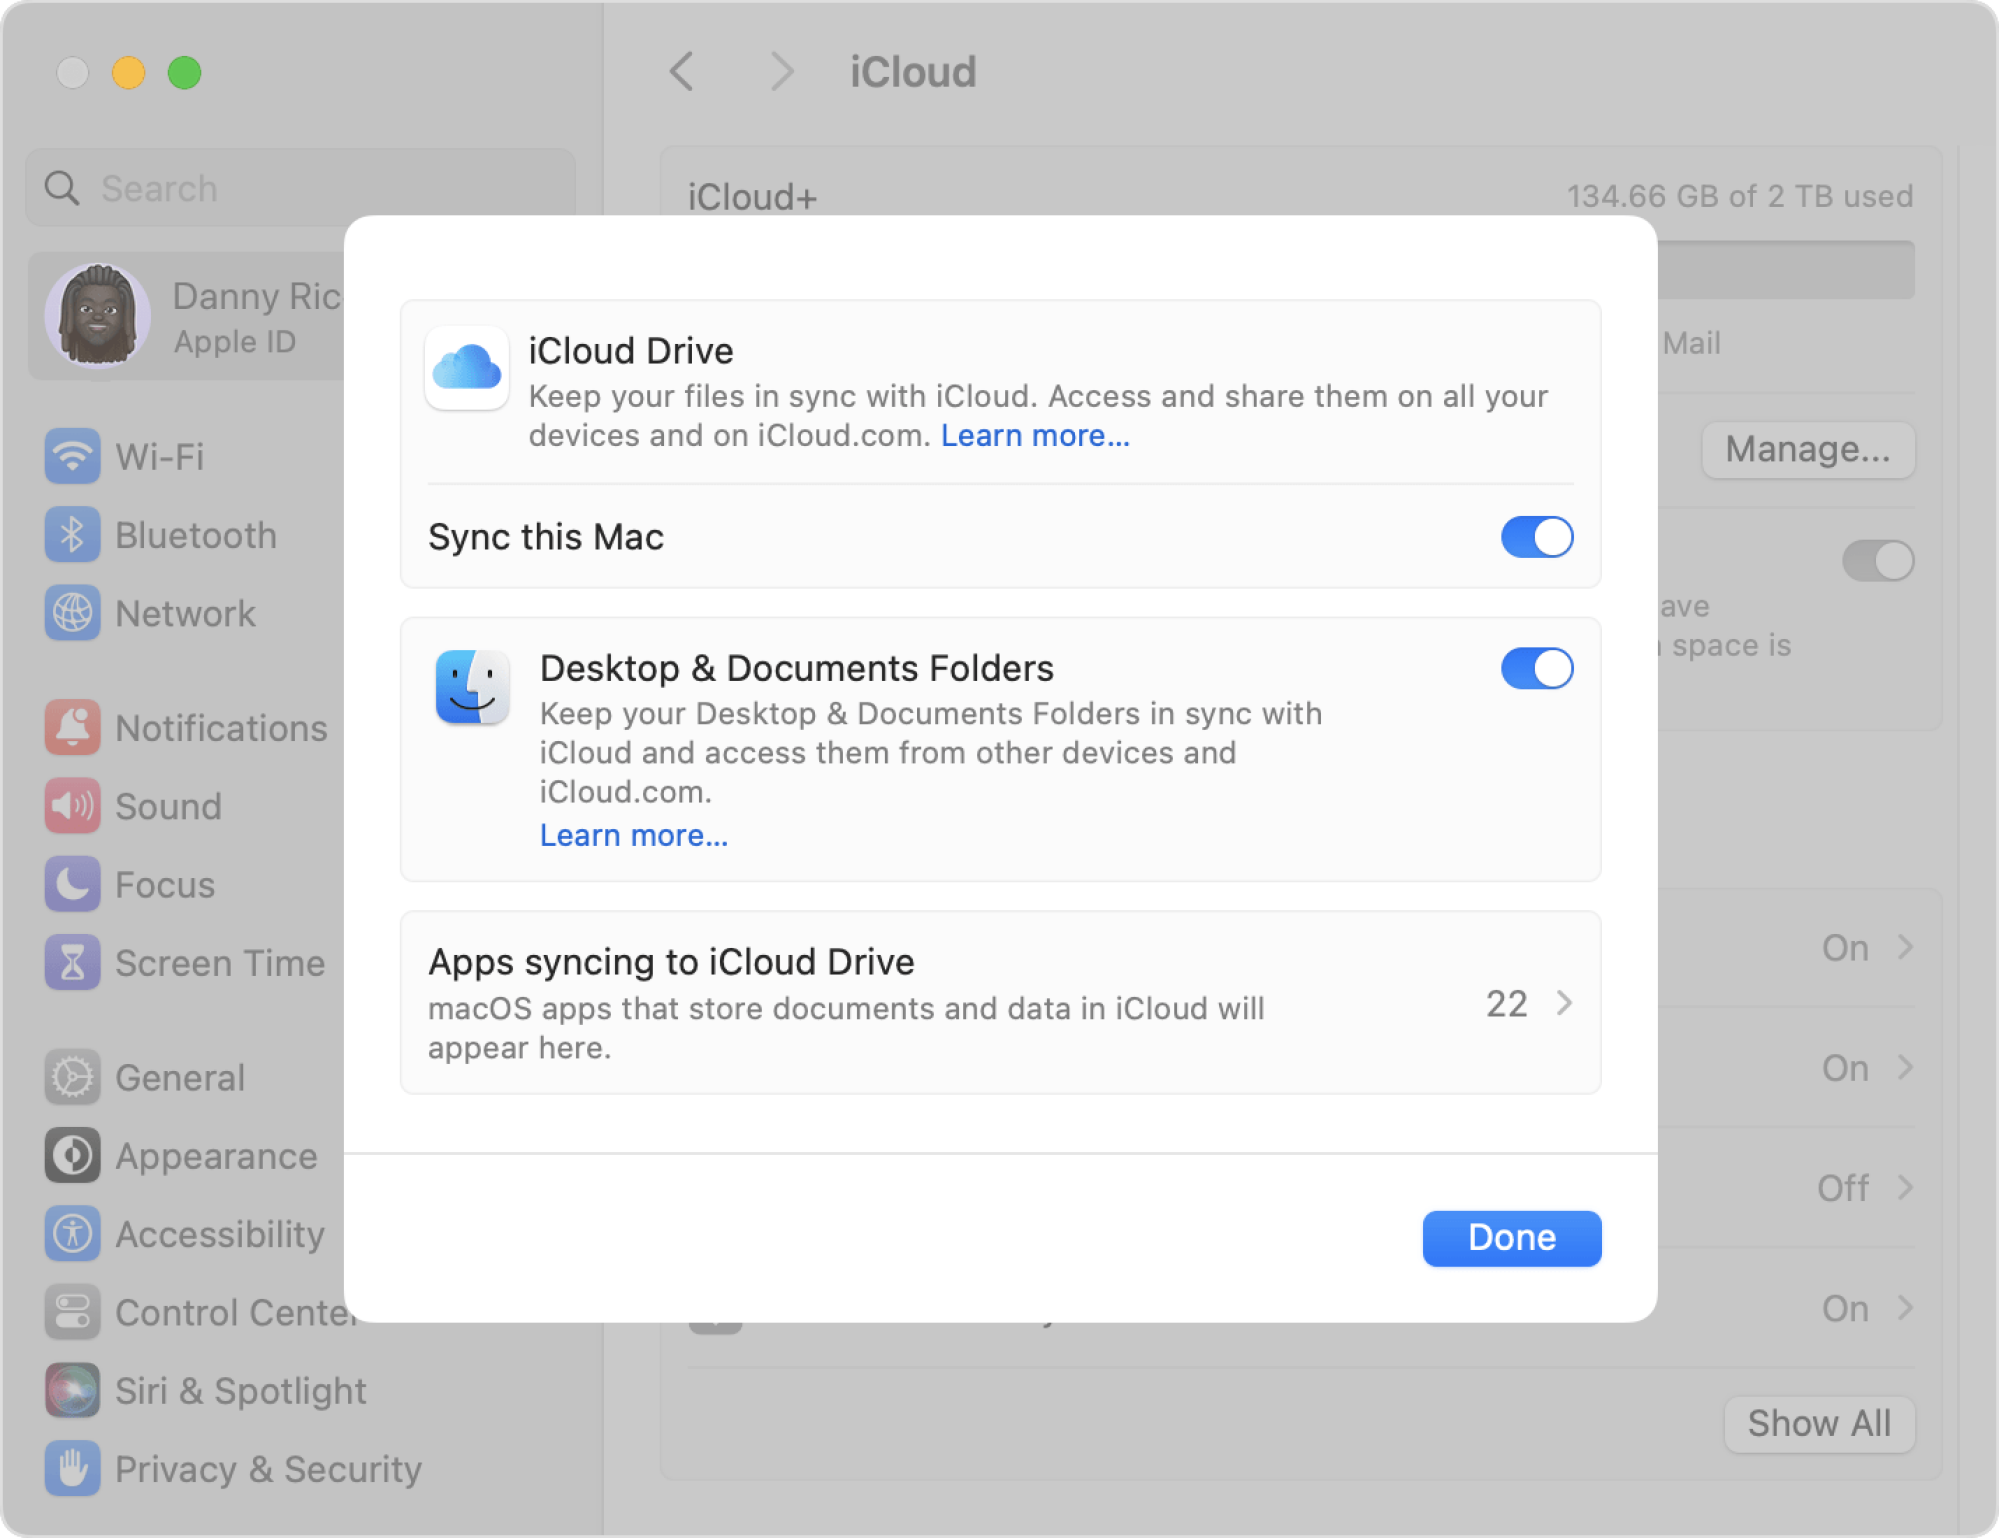 iCloud Drive feature for syncing Documents and Desktop folder on the Mac